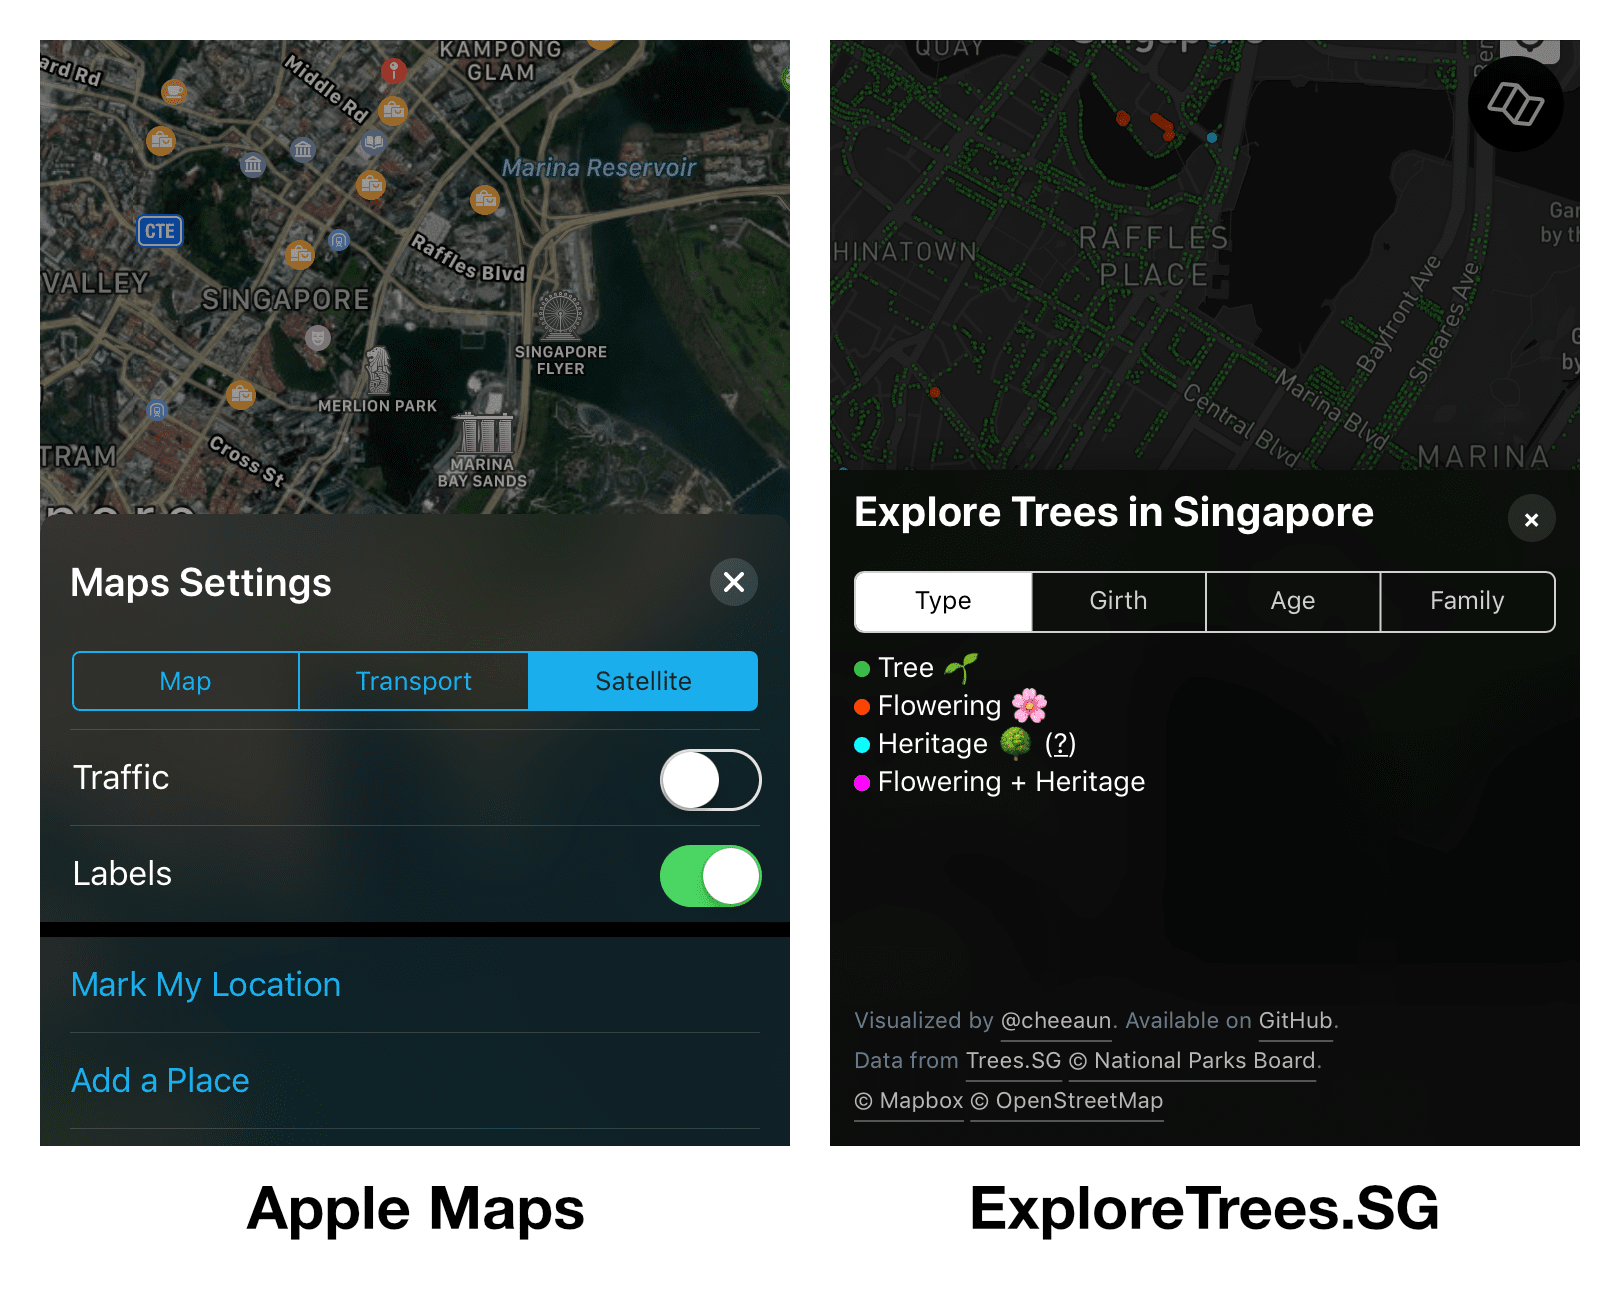 Apple Maps Settings compared to Layers panel in ExploreTrees.SG